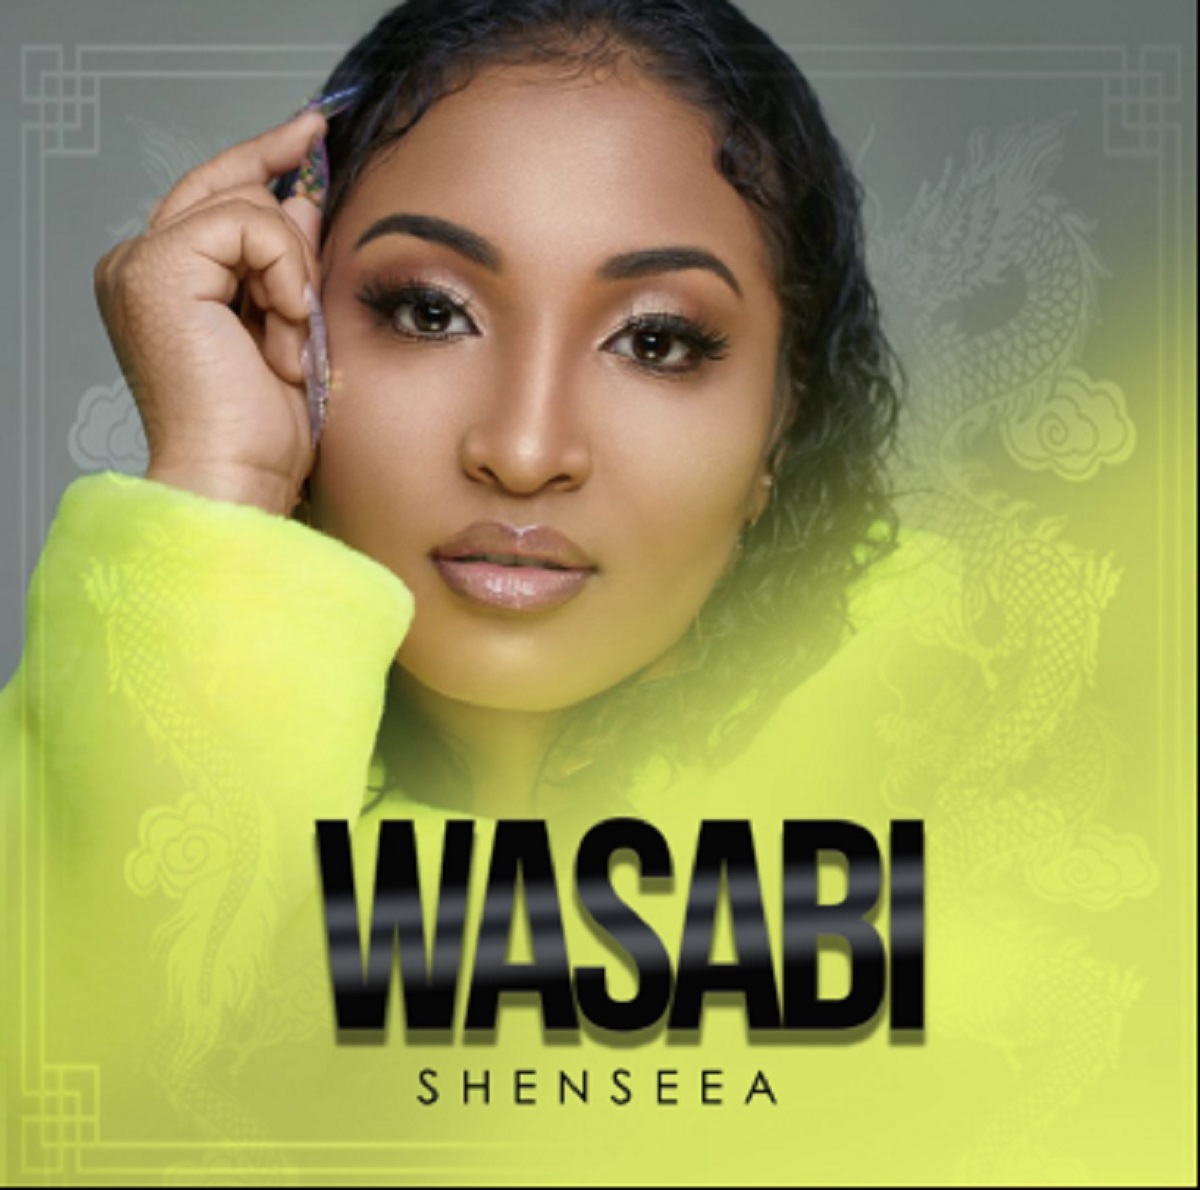 Shenseea returns with her new single, "Wasabi," which follows the release of her previous single, "The Sidechick Song," that recently reached 7.1 million streams.